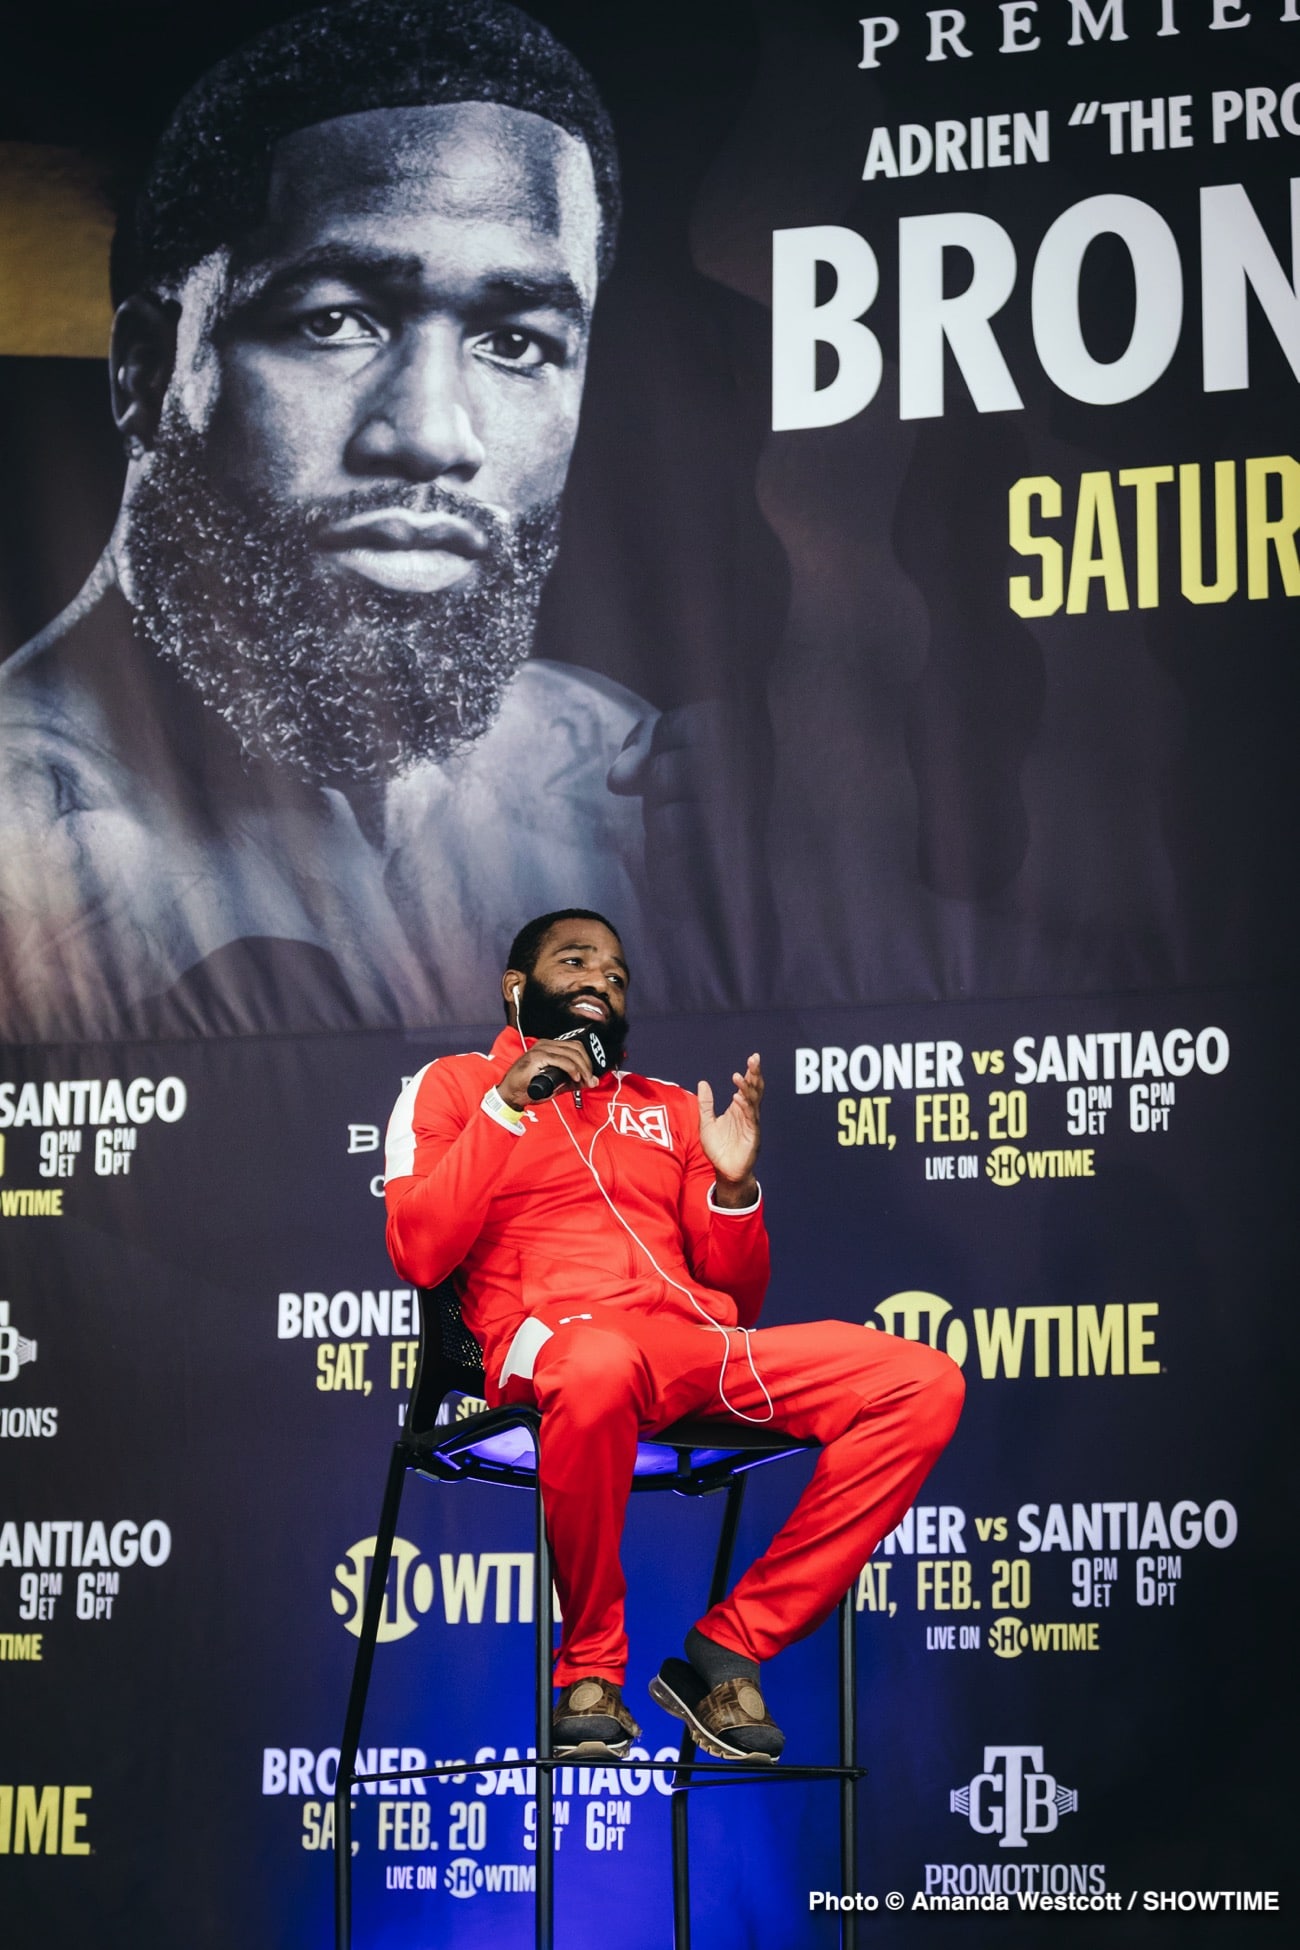 Image: BLK Prime's Signing Of Adrien Broner Could Persuade Other Boxers